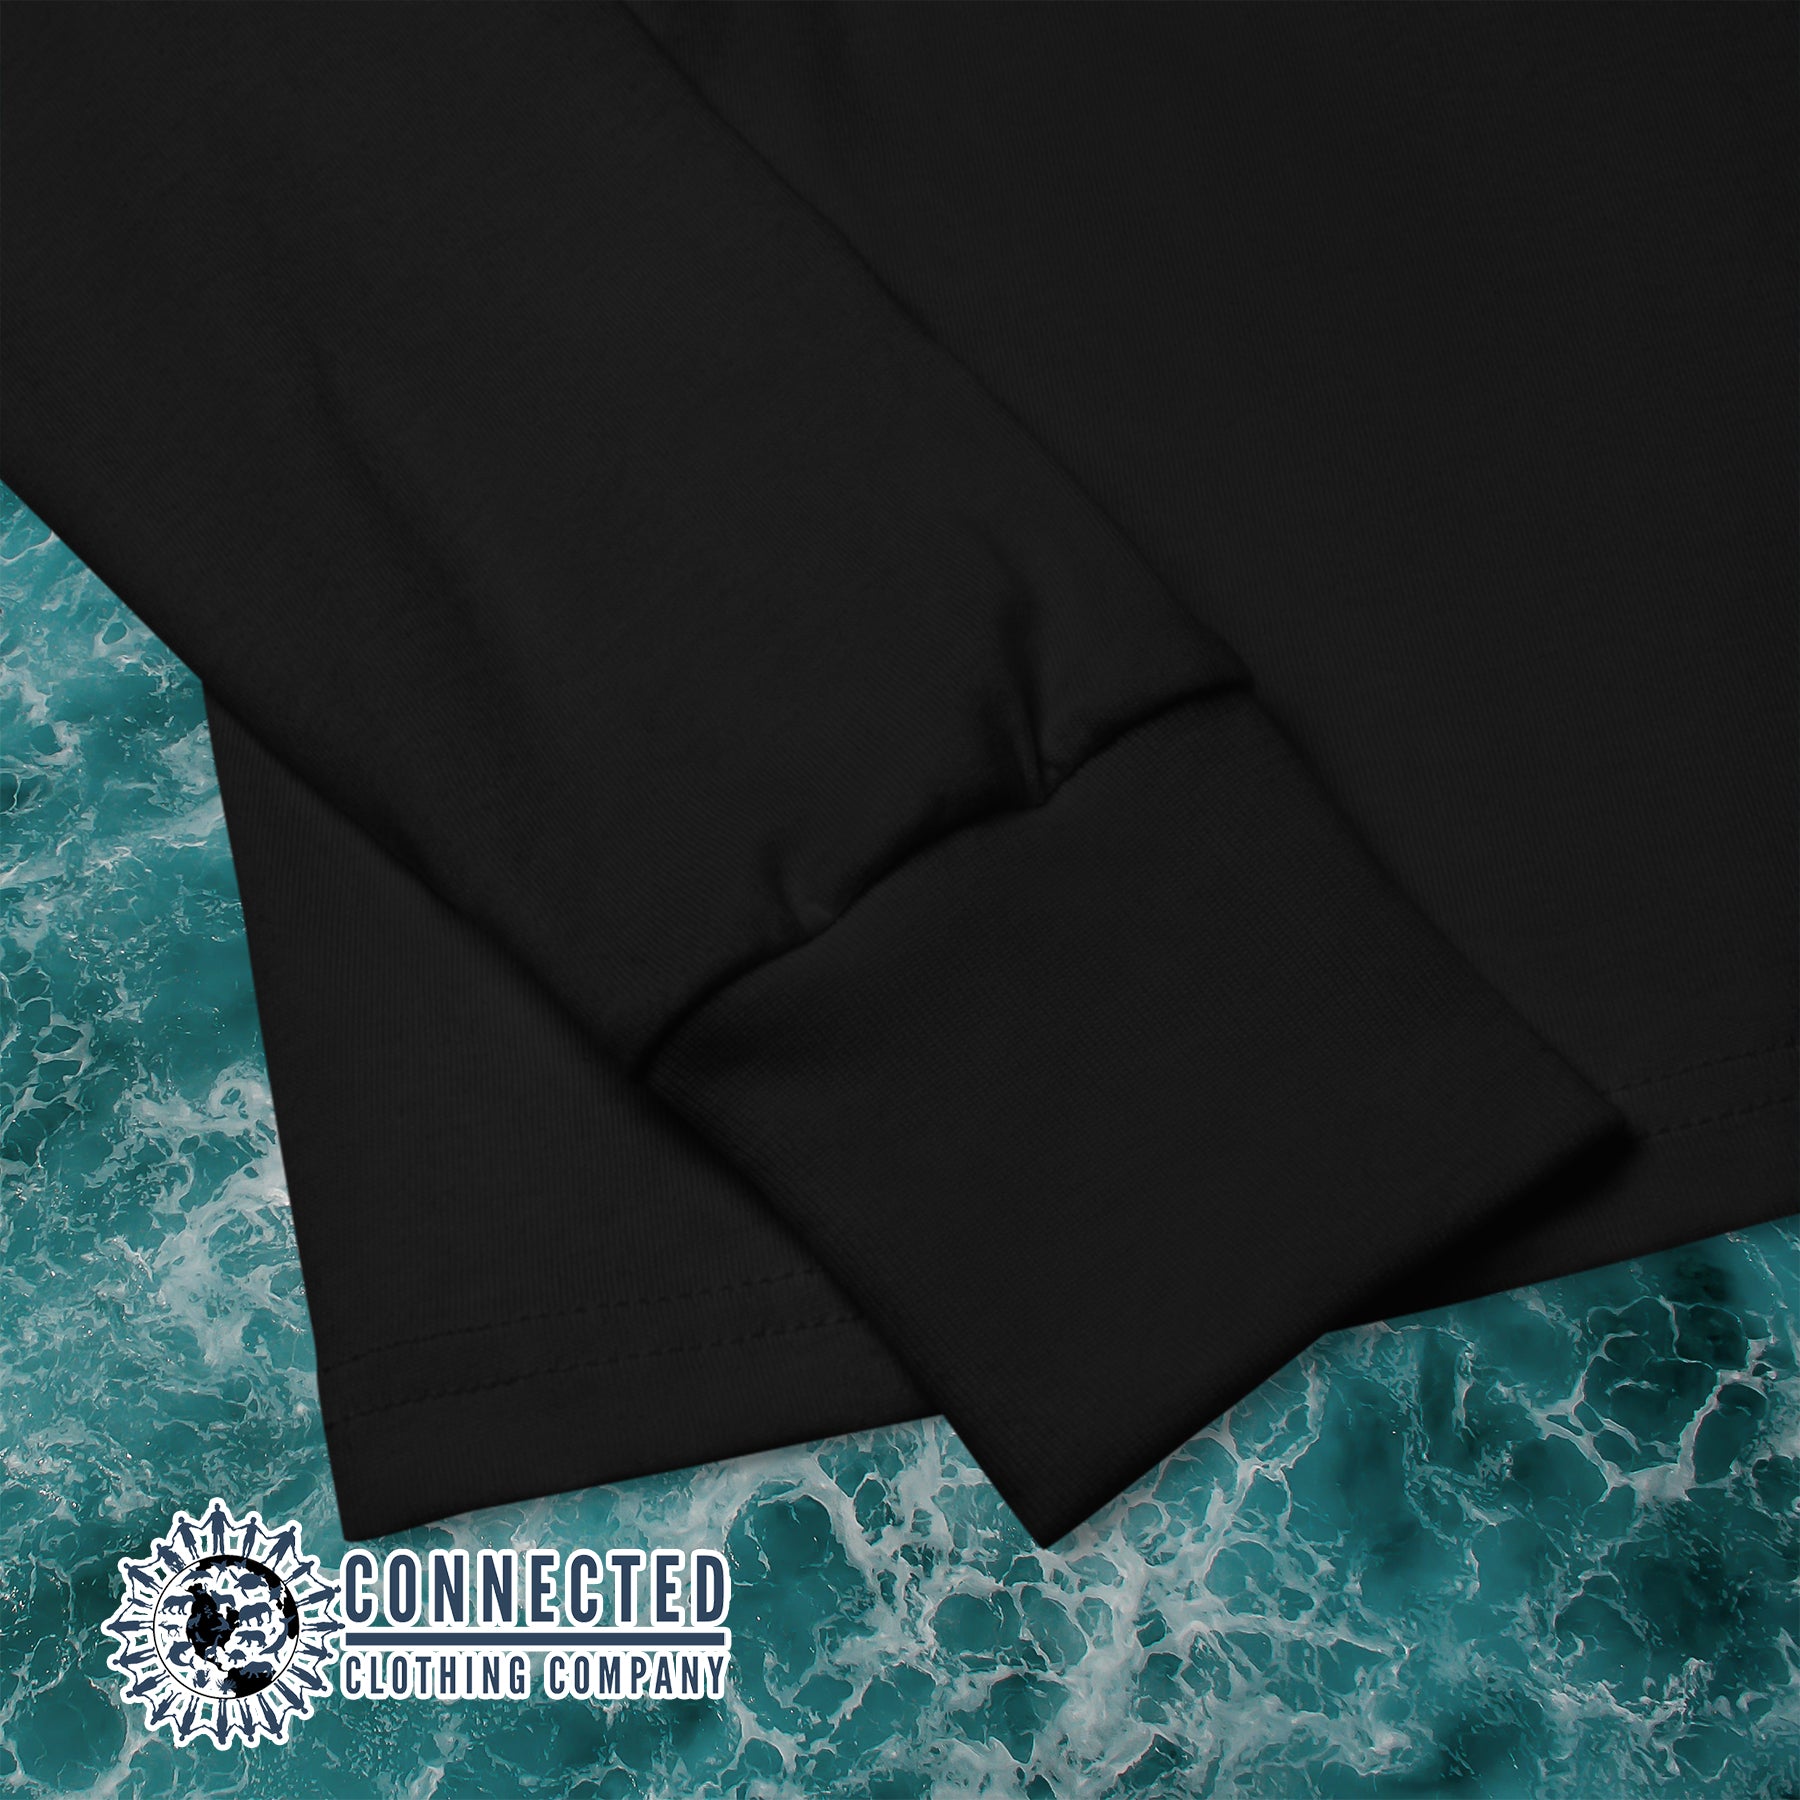 Sleeve Details of Black Protect Our Sharks Youth Long-Sleeve Tee - sweetsherriloudesigns - Ethically and Sustainably Made - 10% donated to Oceana shark conservation